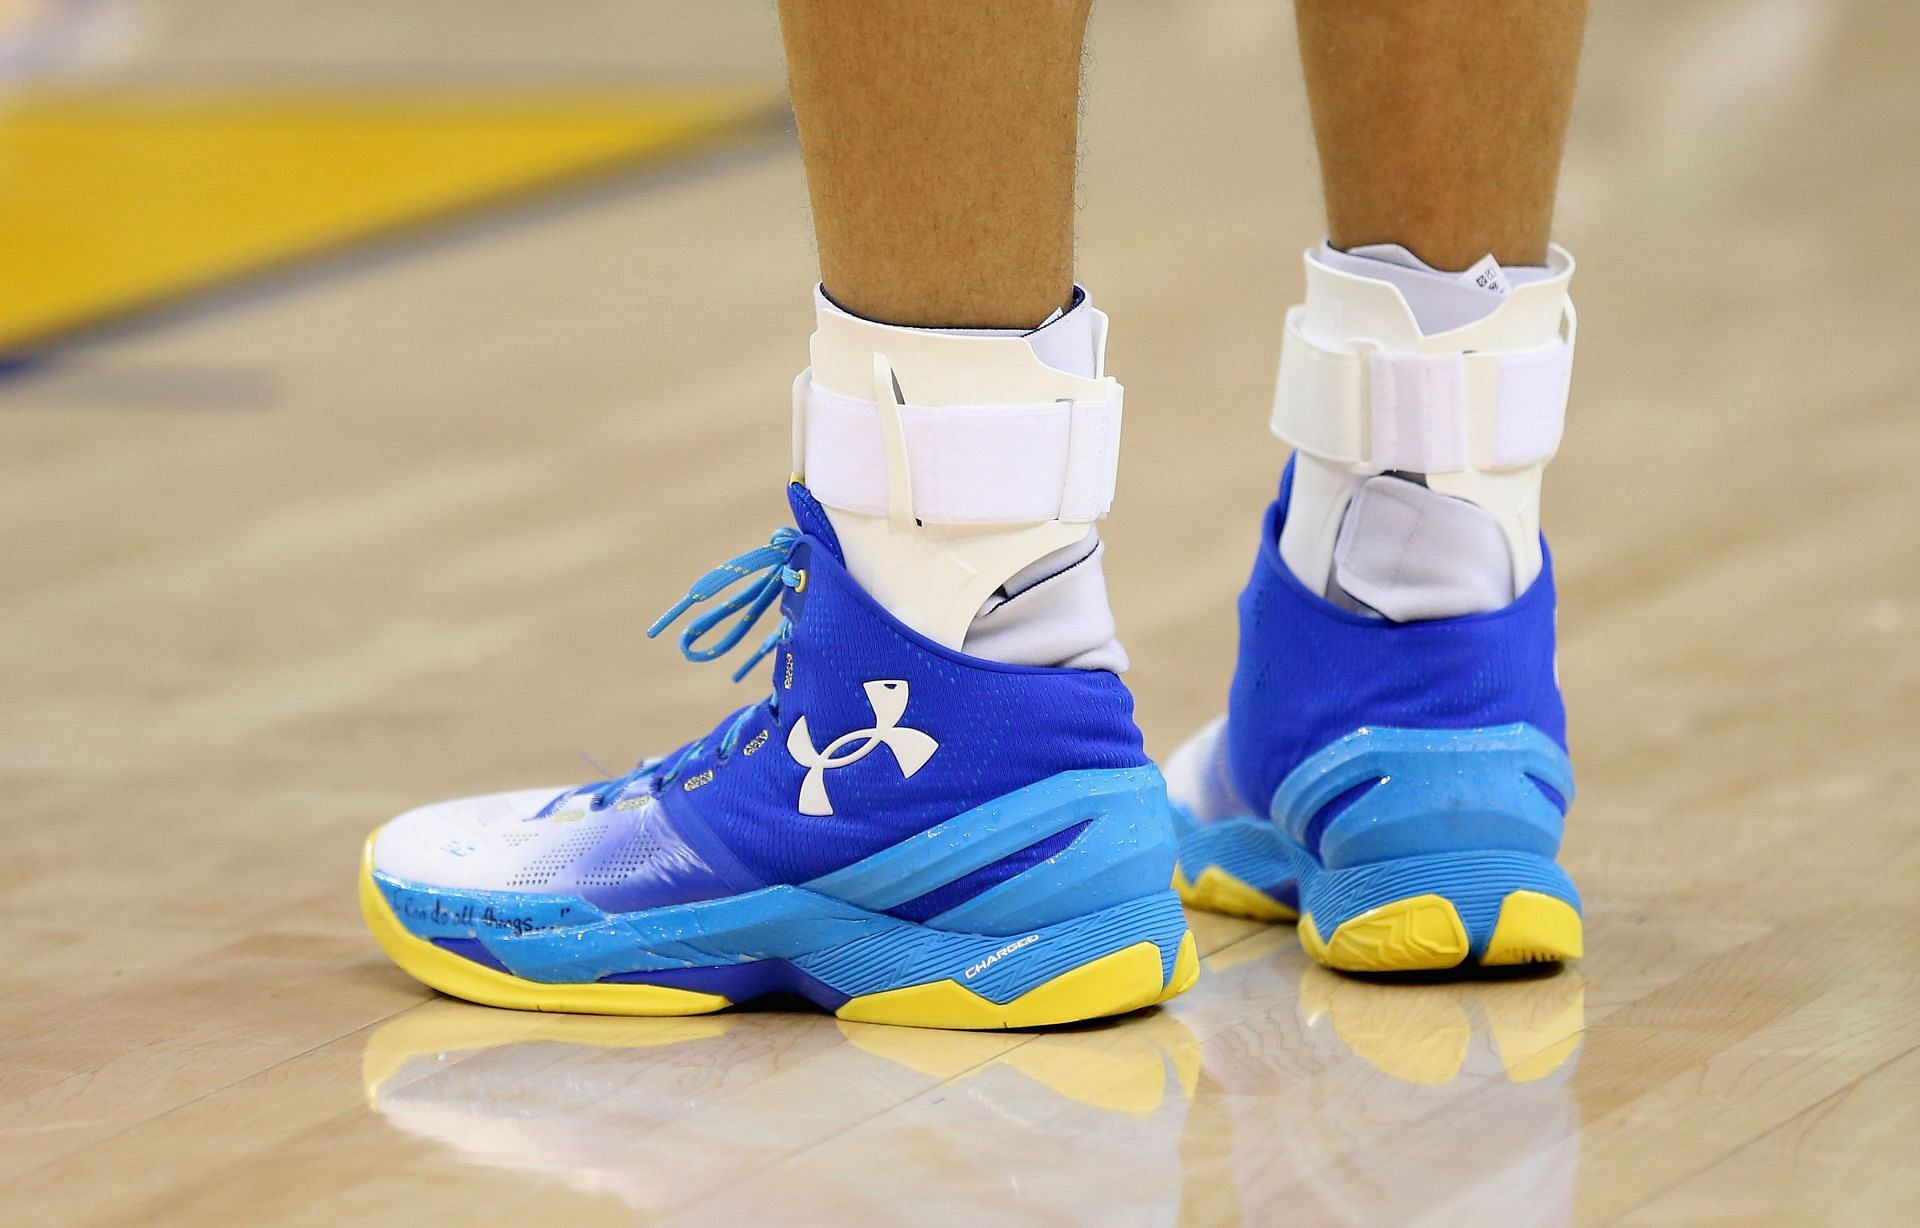 The Curry 2 in a game against the Boston Celtics